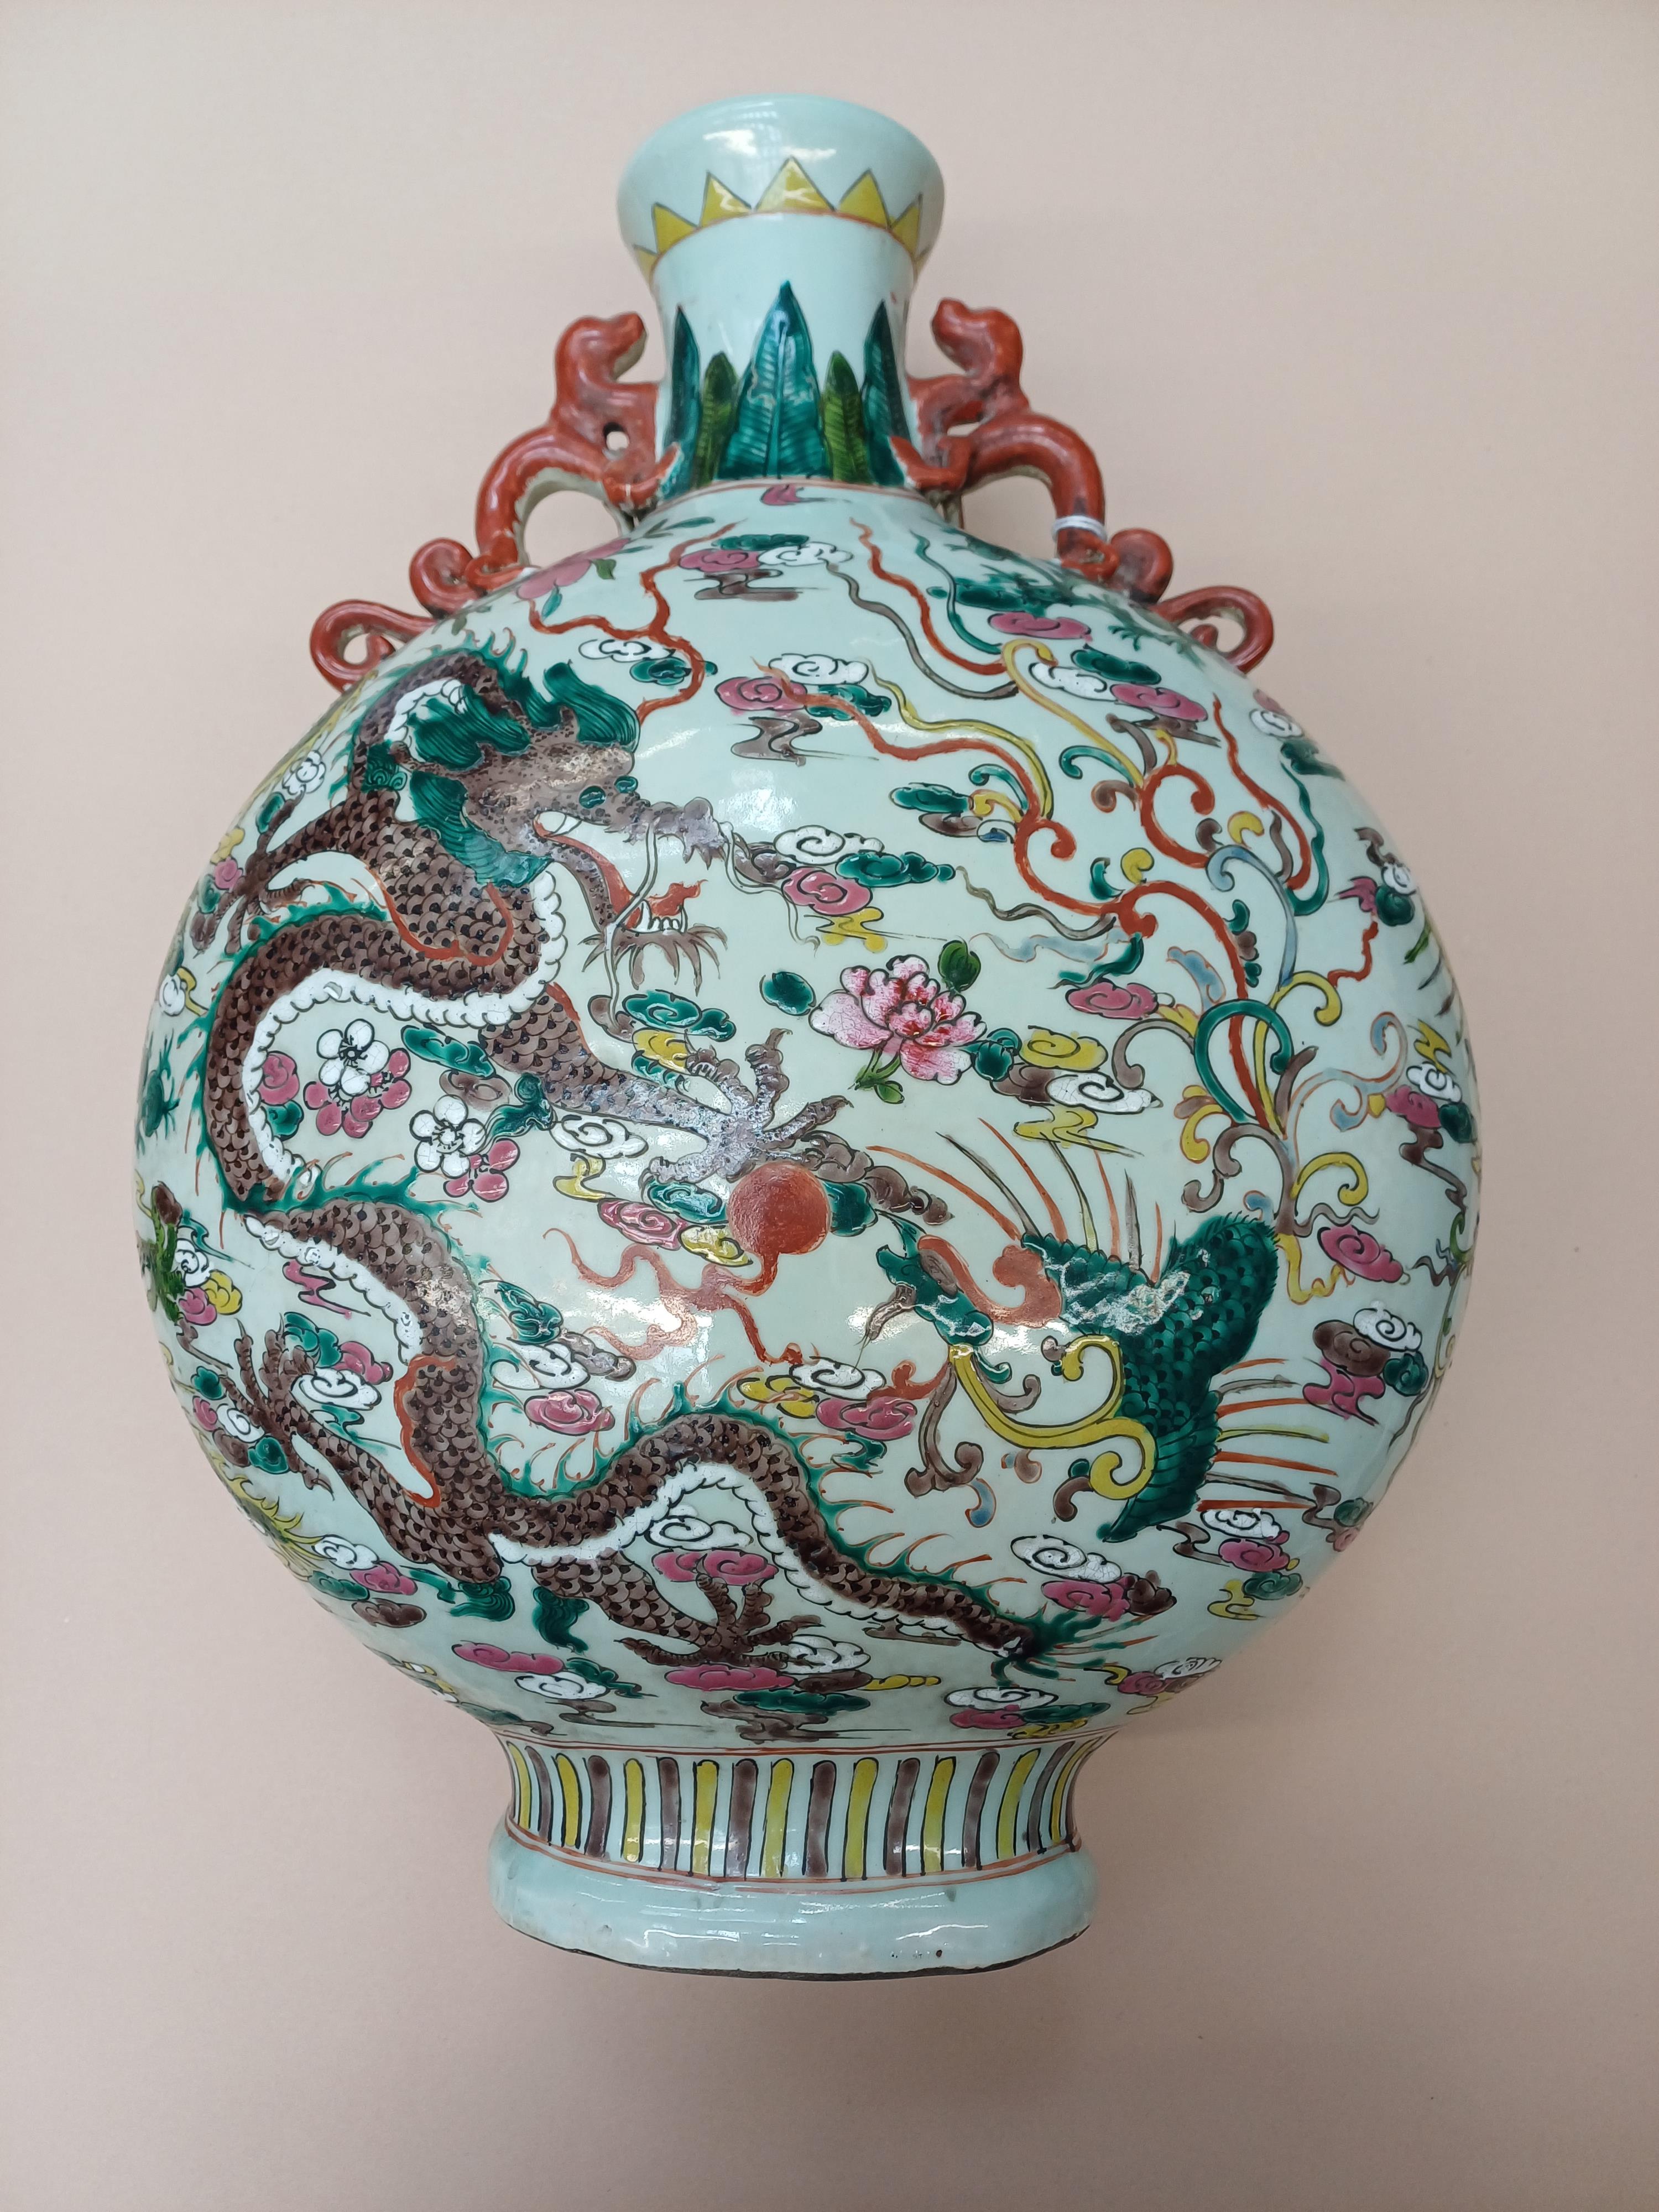 A CHINESE FAMILLE-ROSE 'DRAGON AND PHOENIX' MOONFLASK VASE 二十世紀 粉彩龍鳳呈祥紋抱月瓶 - Image 5 of 9